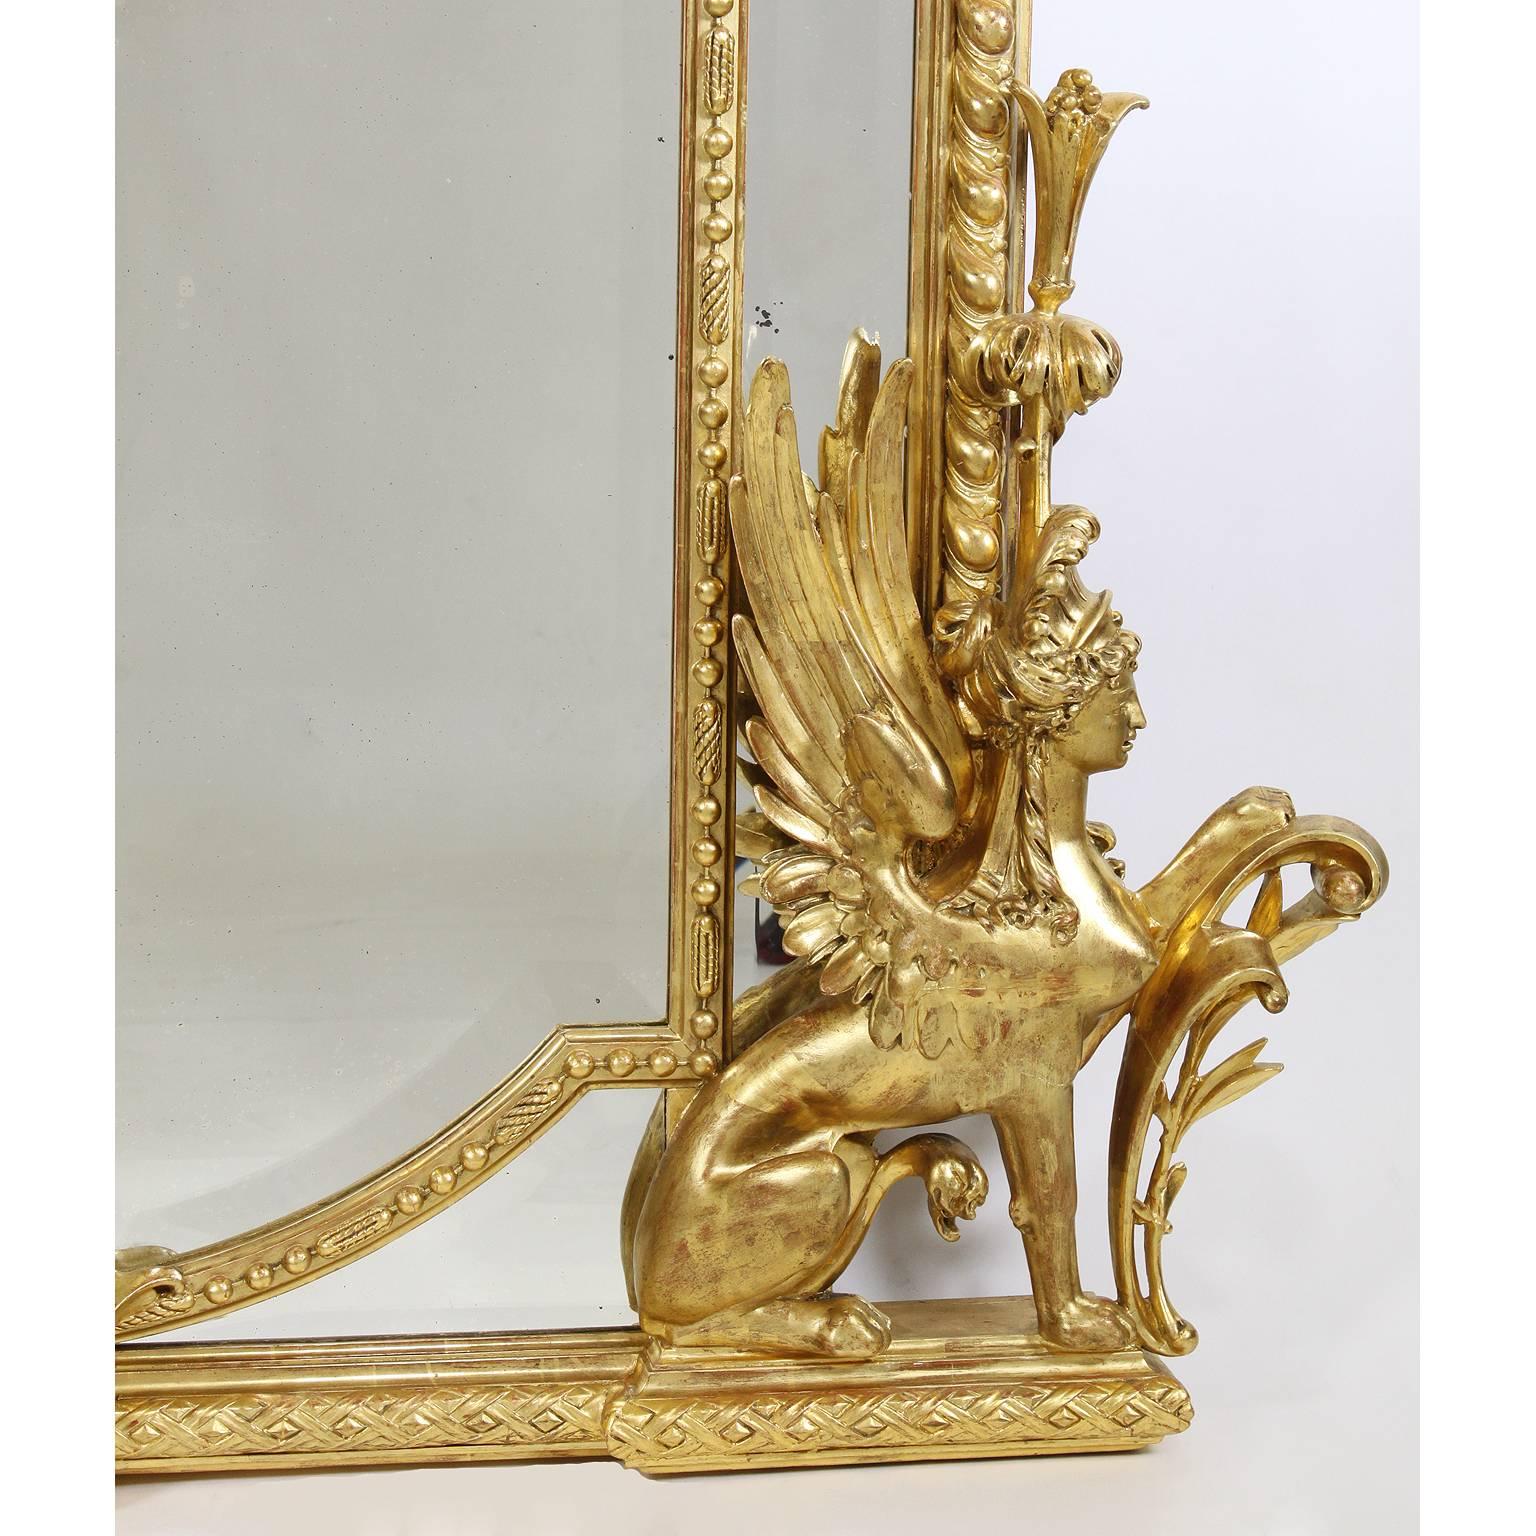 French Empire Style 19th Century Napoleon III Giltwood Mirror with Sphinxes In Good Condition For Sale In Los Angeles, CA